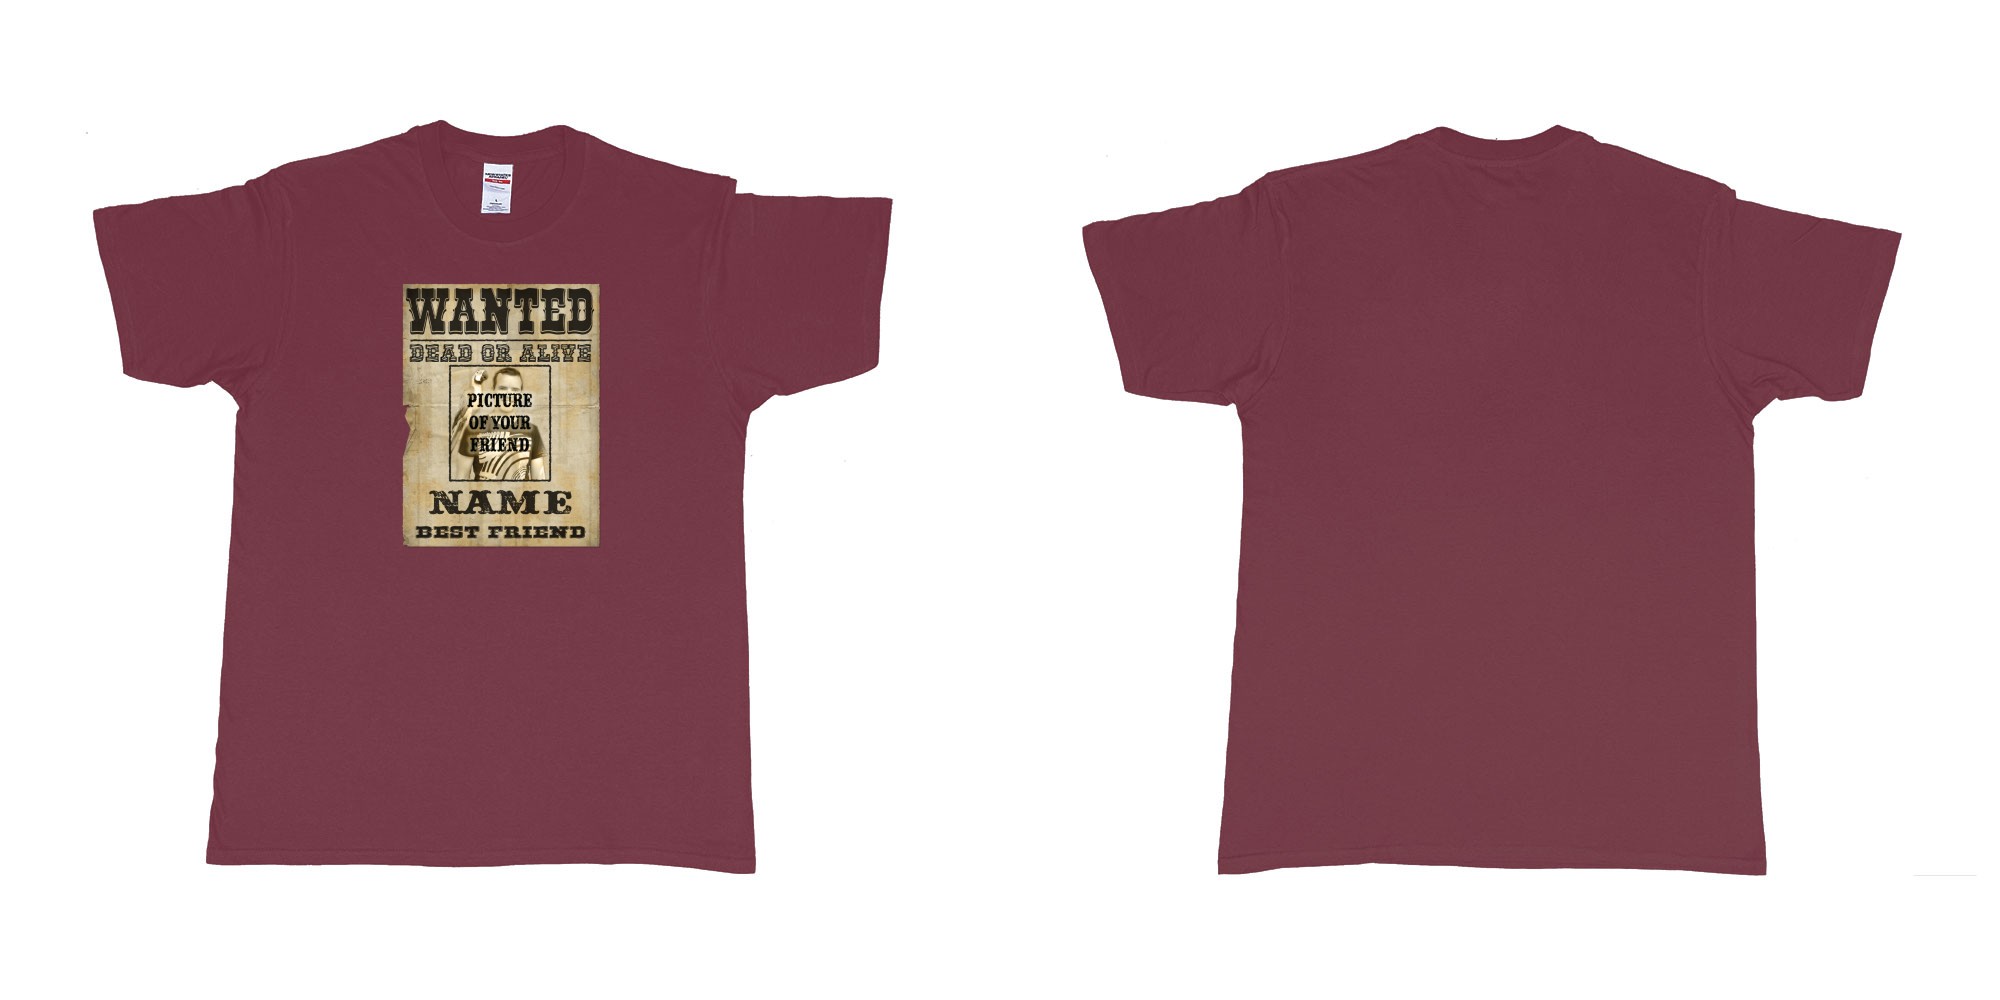 Custom tshirt design Wanted Poster in fabric color marron choice your own text made in Bali by The Pirate Way